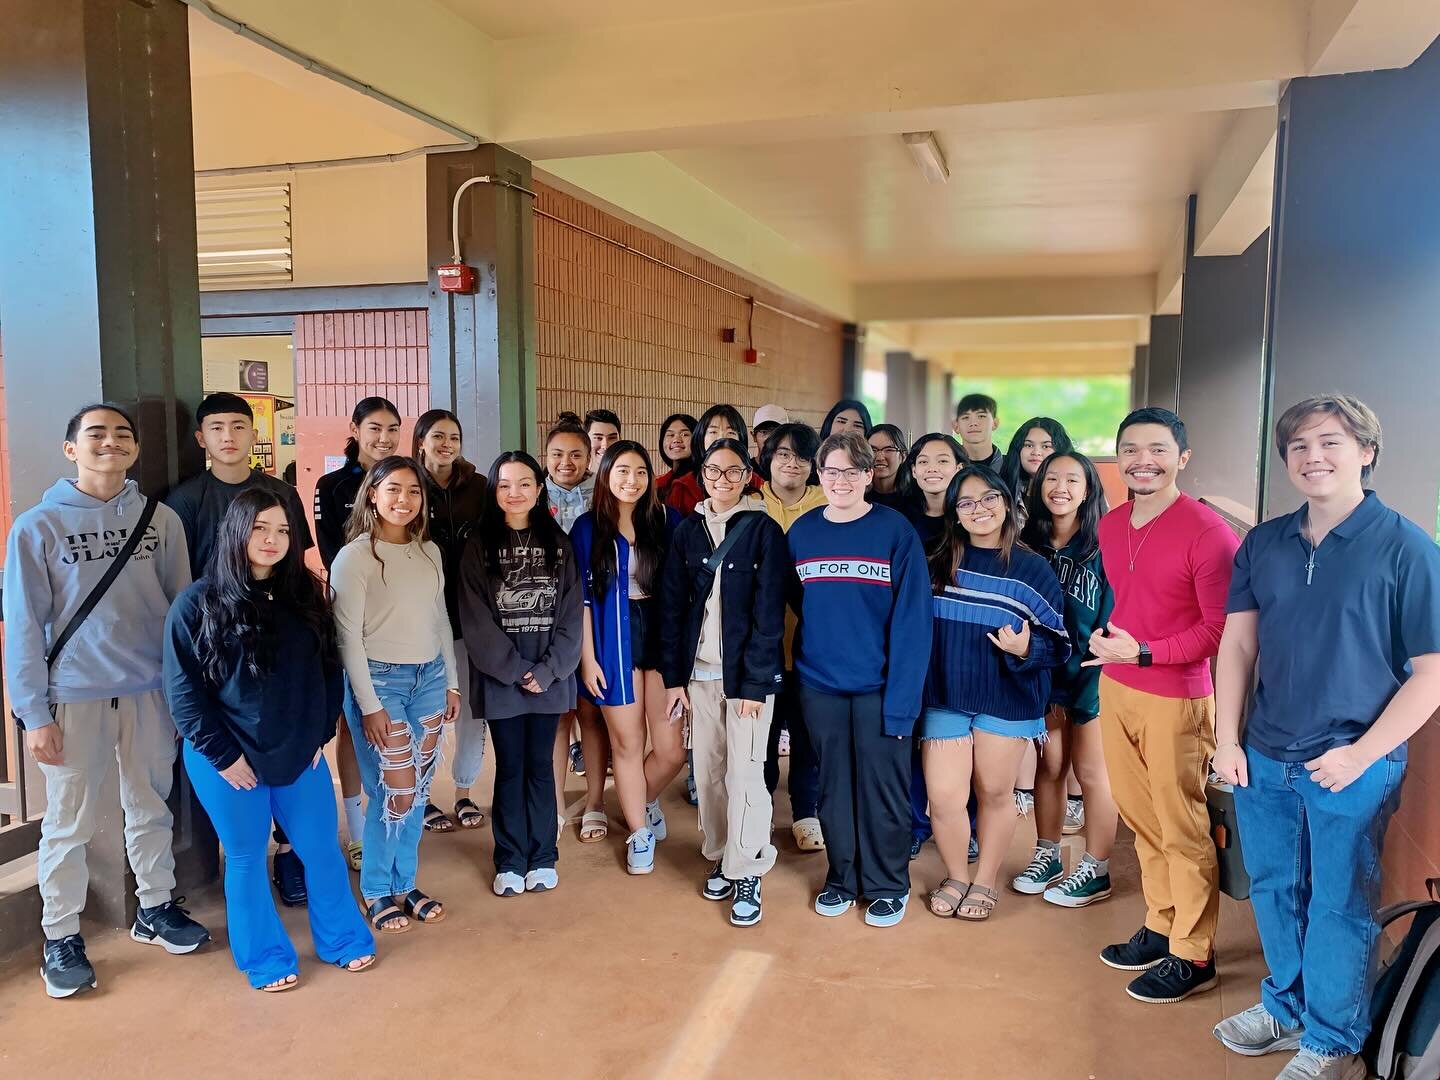 ⁠
Congrats to Pearl City High School for being leaders in online safety and education for their students!⁠
⁠
Chaz Mihara of CTL and OER&rsquo;s Constancio Paranal and Reyn Wilson held a session on how to spot and avoid online scammers. Cyber thieves 